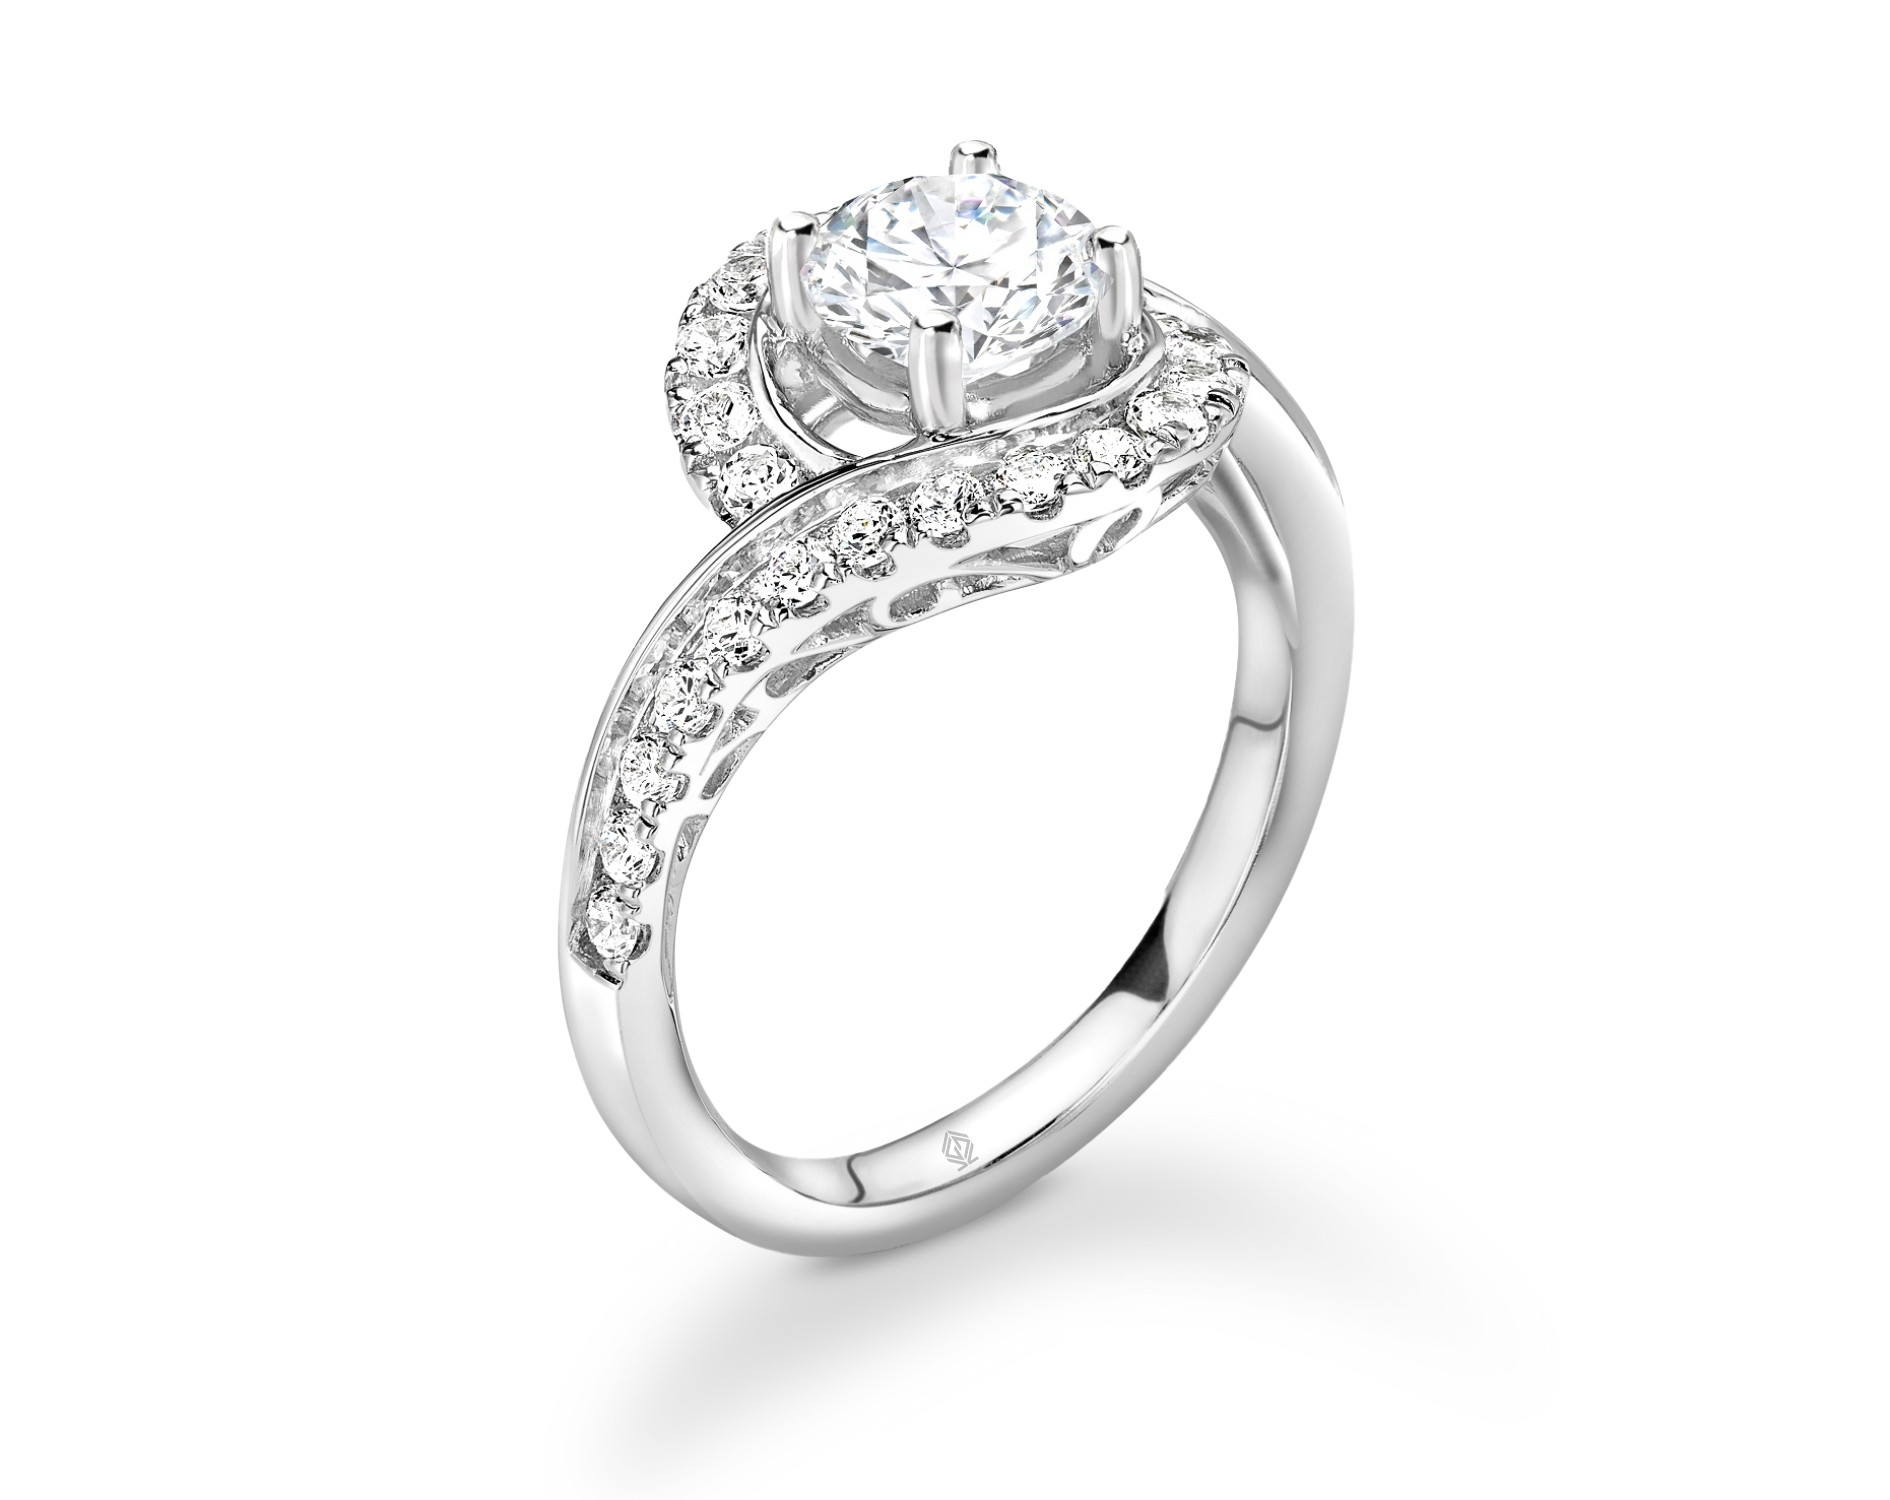 18K WHITE GOLD HALO DIAMOND AND TWISTED SHANK ENGAGEMENT RING IN PAVE SET